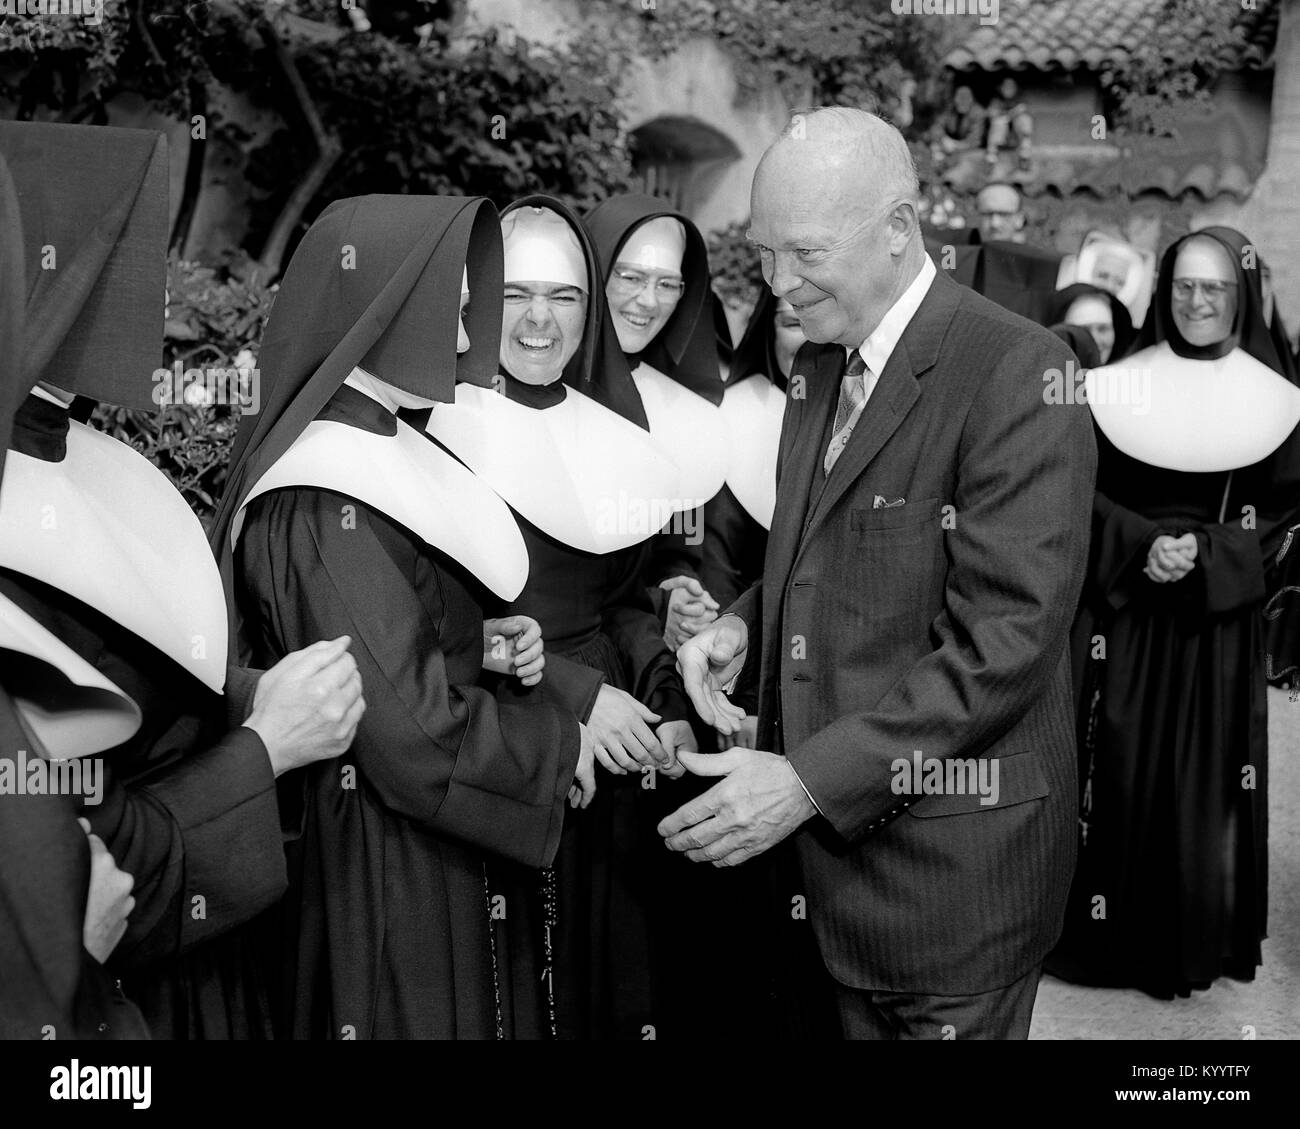 President Dwight Eisenhower shakes hands with nuns at Carmel Mission, California. August 26, 1956 Image from 4x5 inch B&W negative. Stock Photo